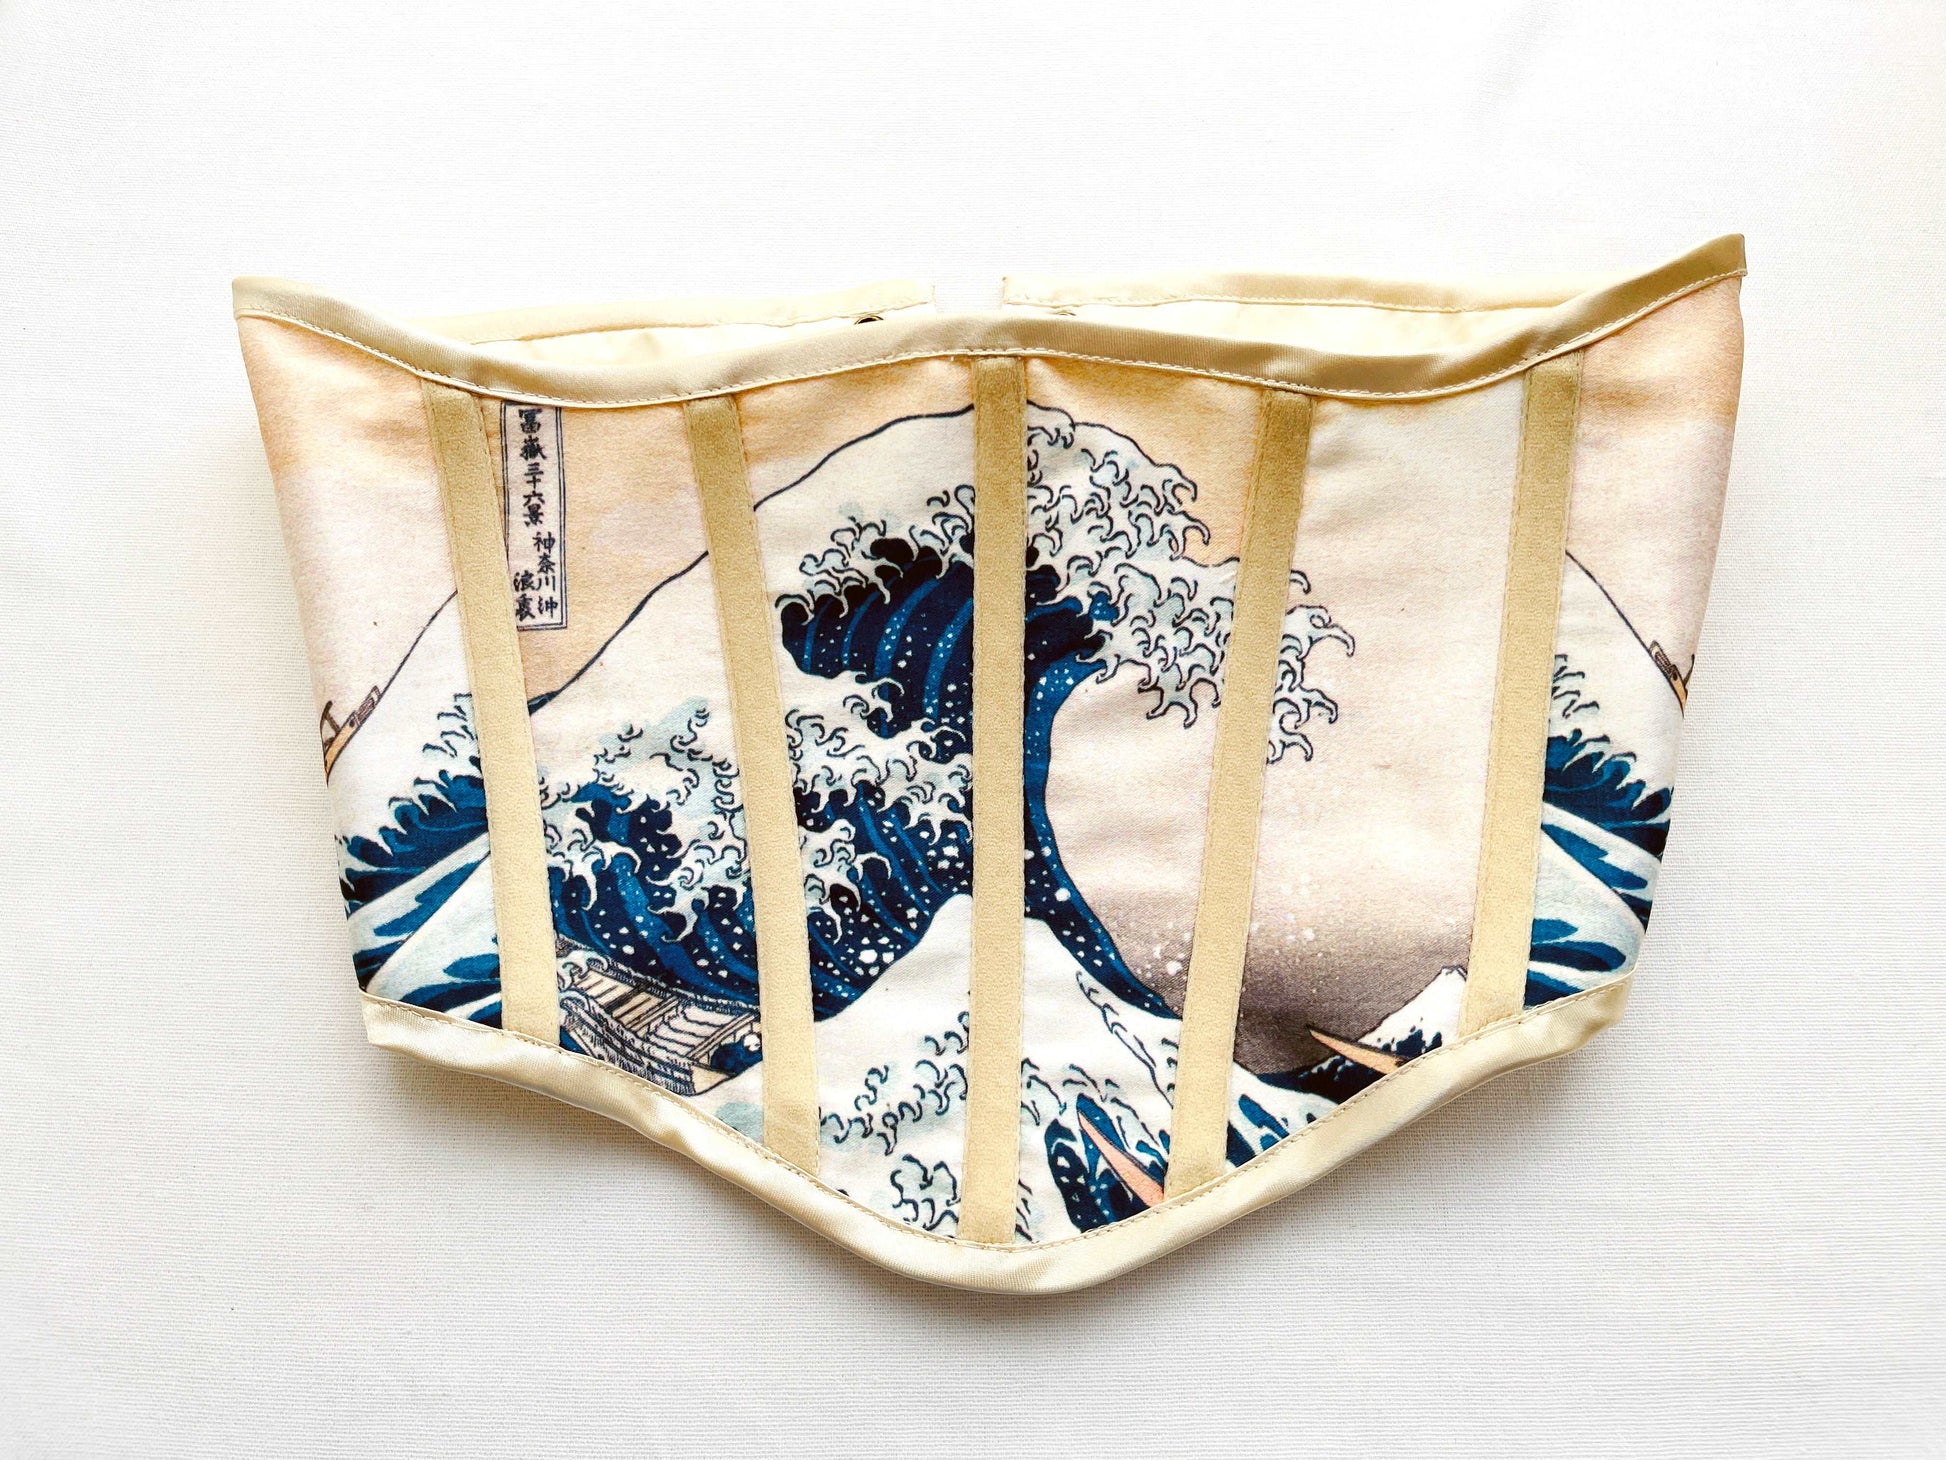 Front view of the Handmade Vintage Under Bust Corset - The Great Wave off Kanagawa on a white background.